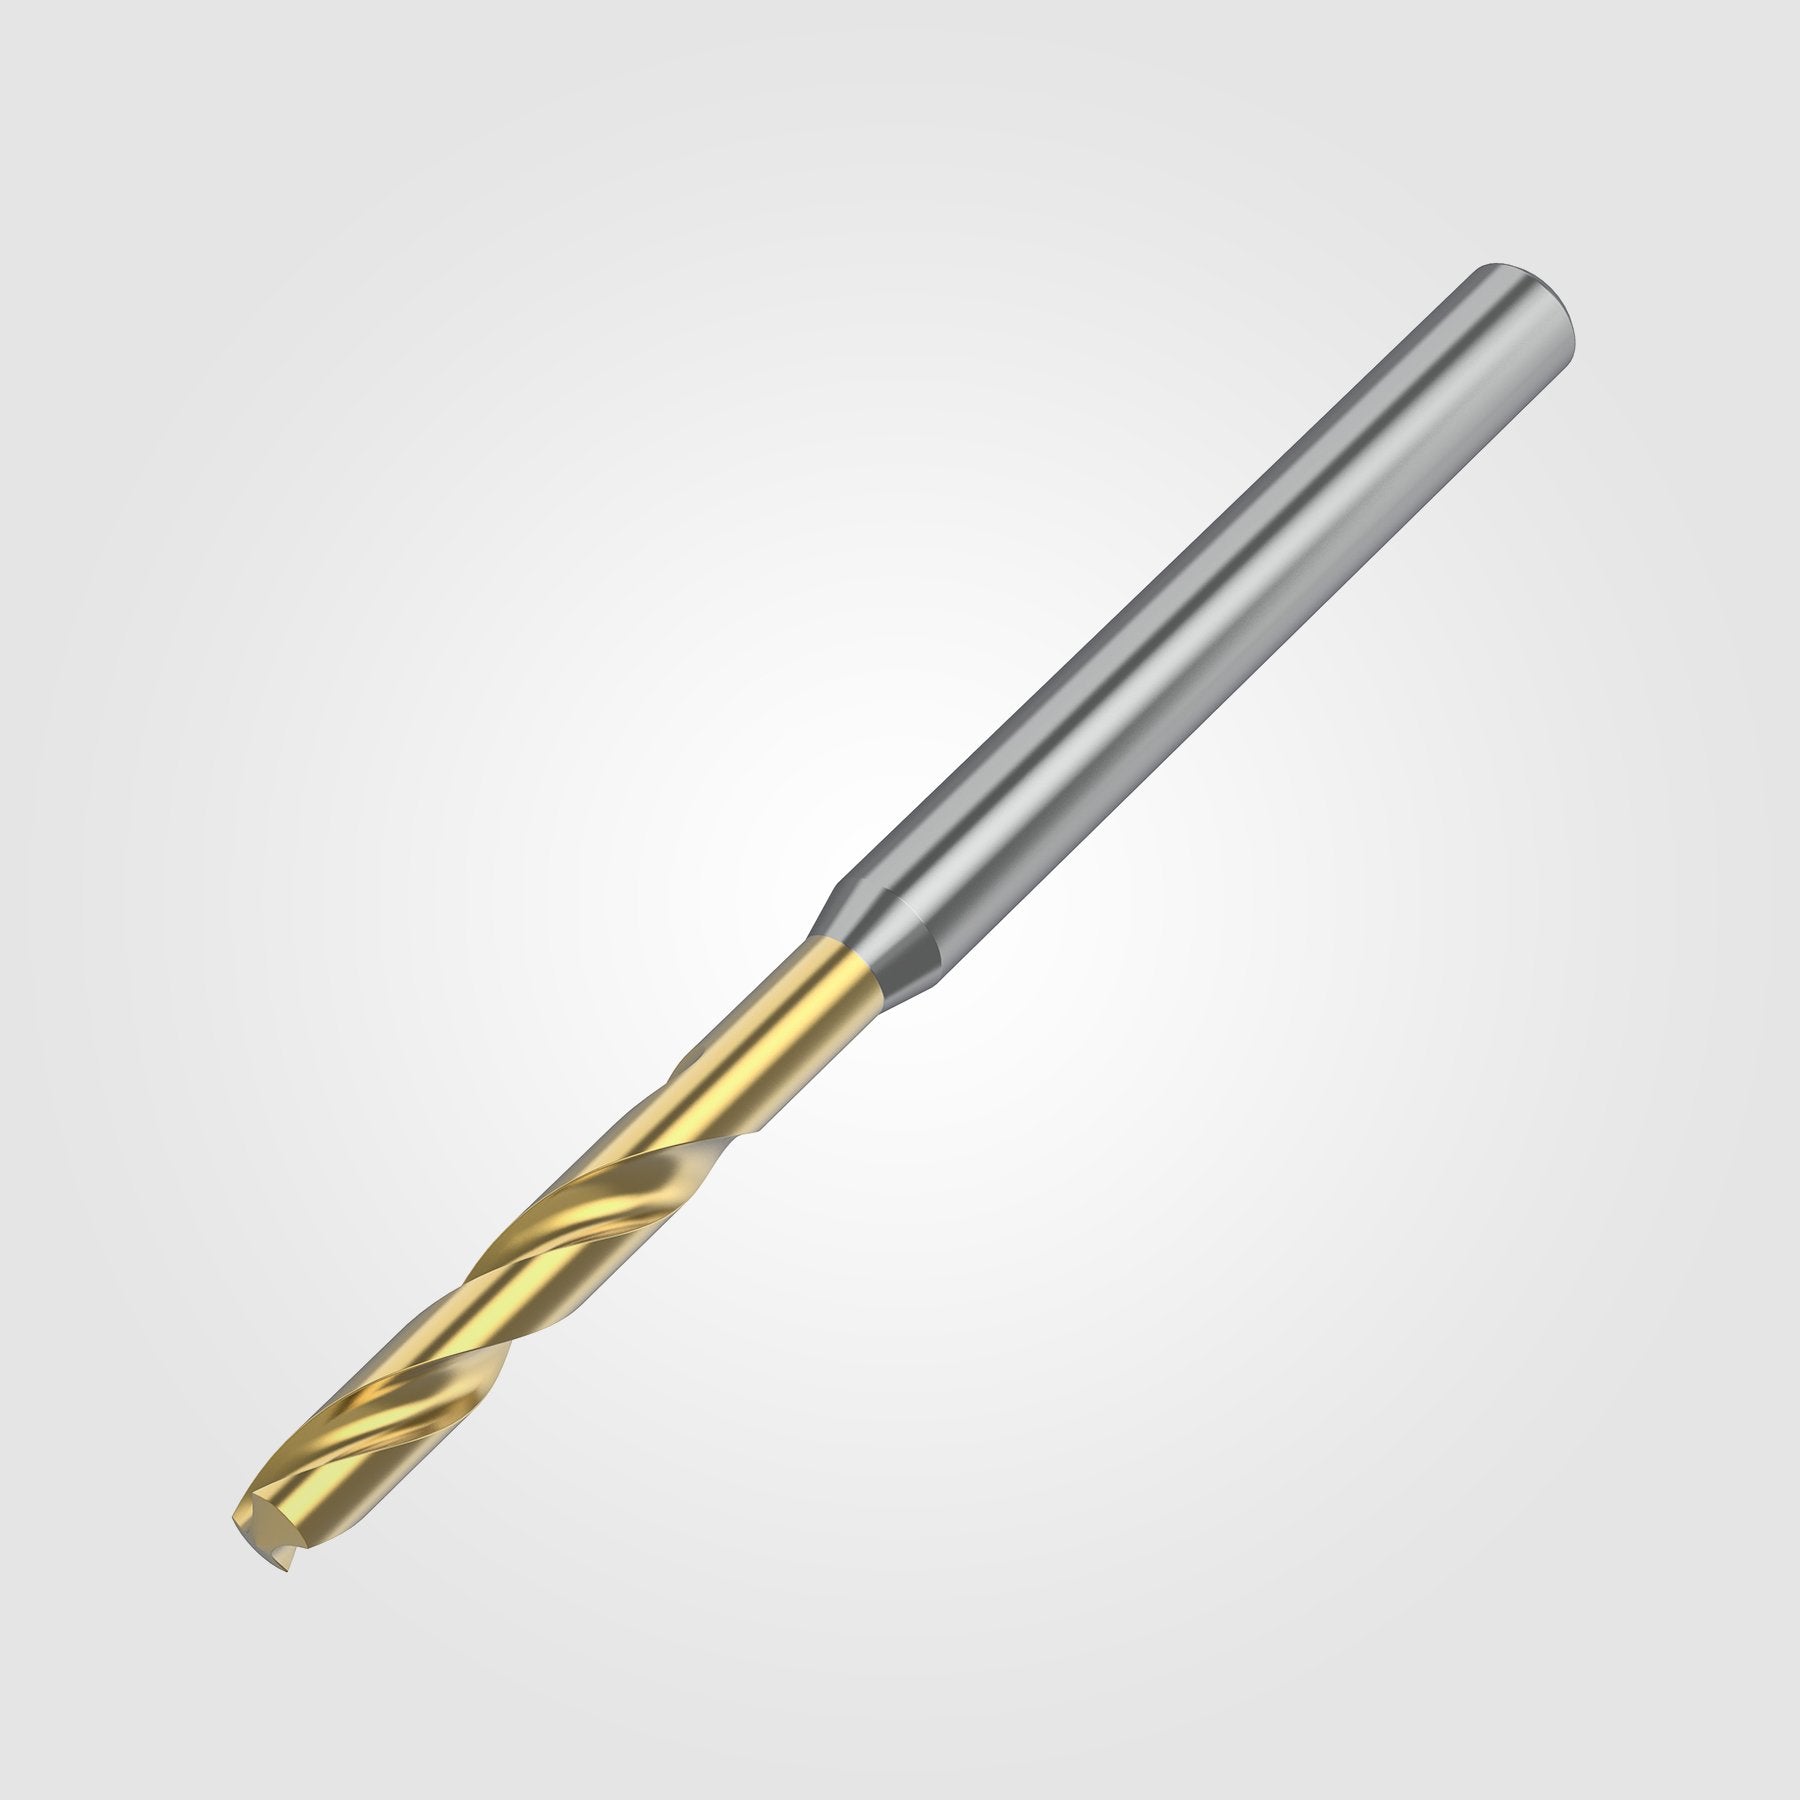 GOdrill (THROUGH COOLANT) | 9.3mm / .3661" / 3xD | SOLID CARBIDE DRILL | 4151192